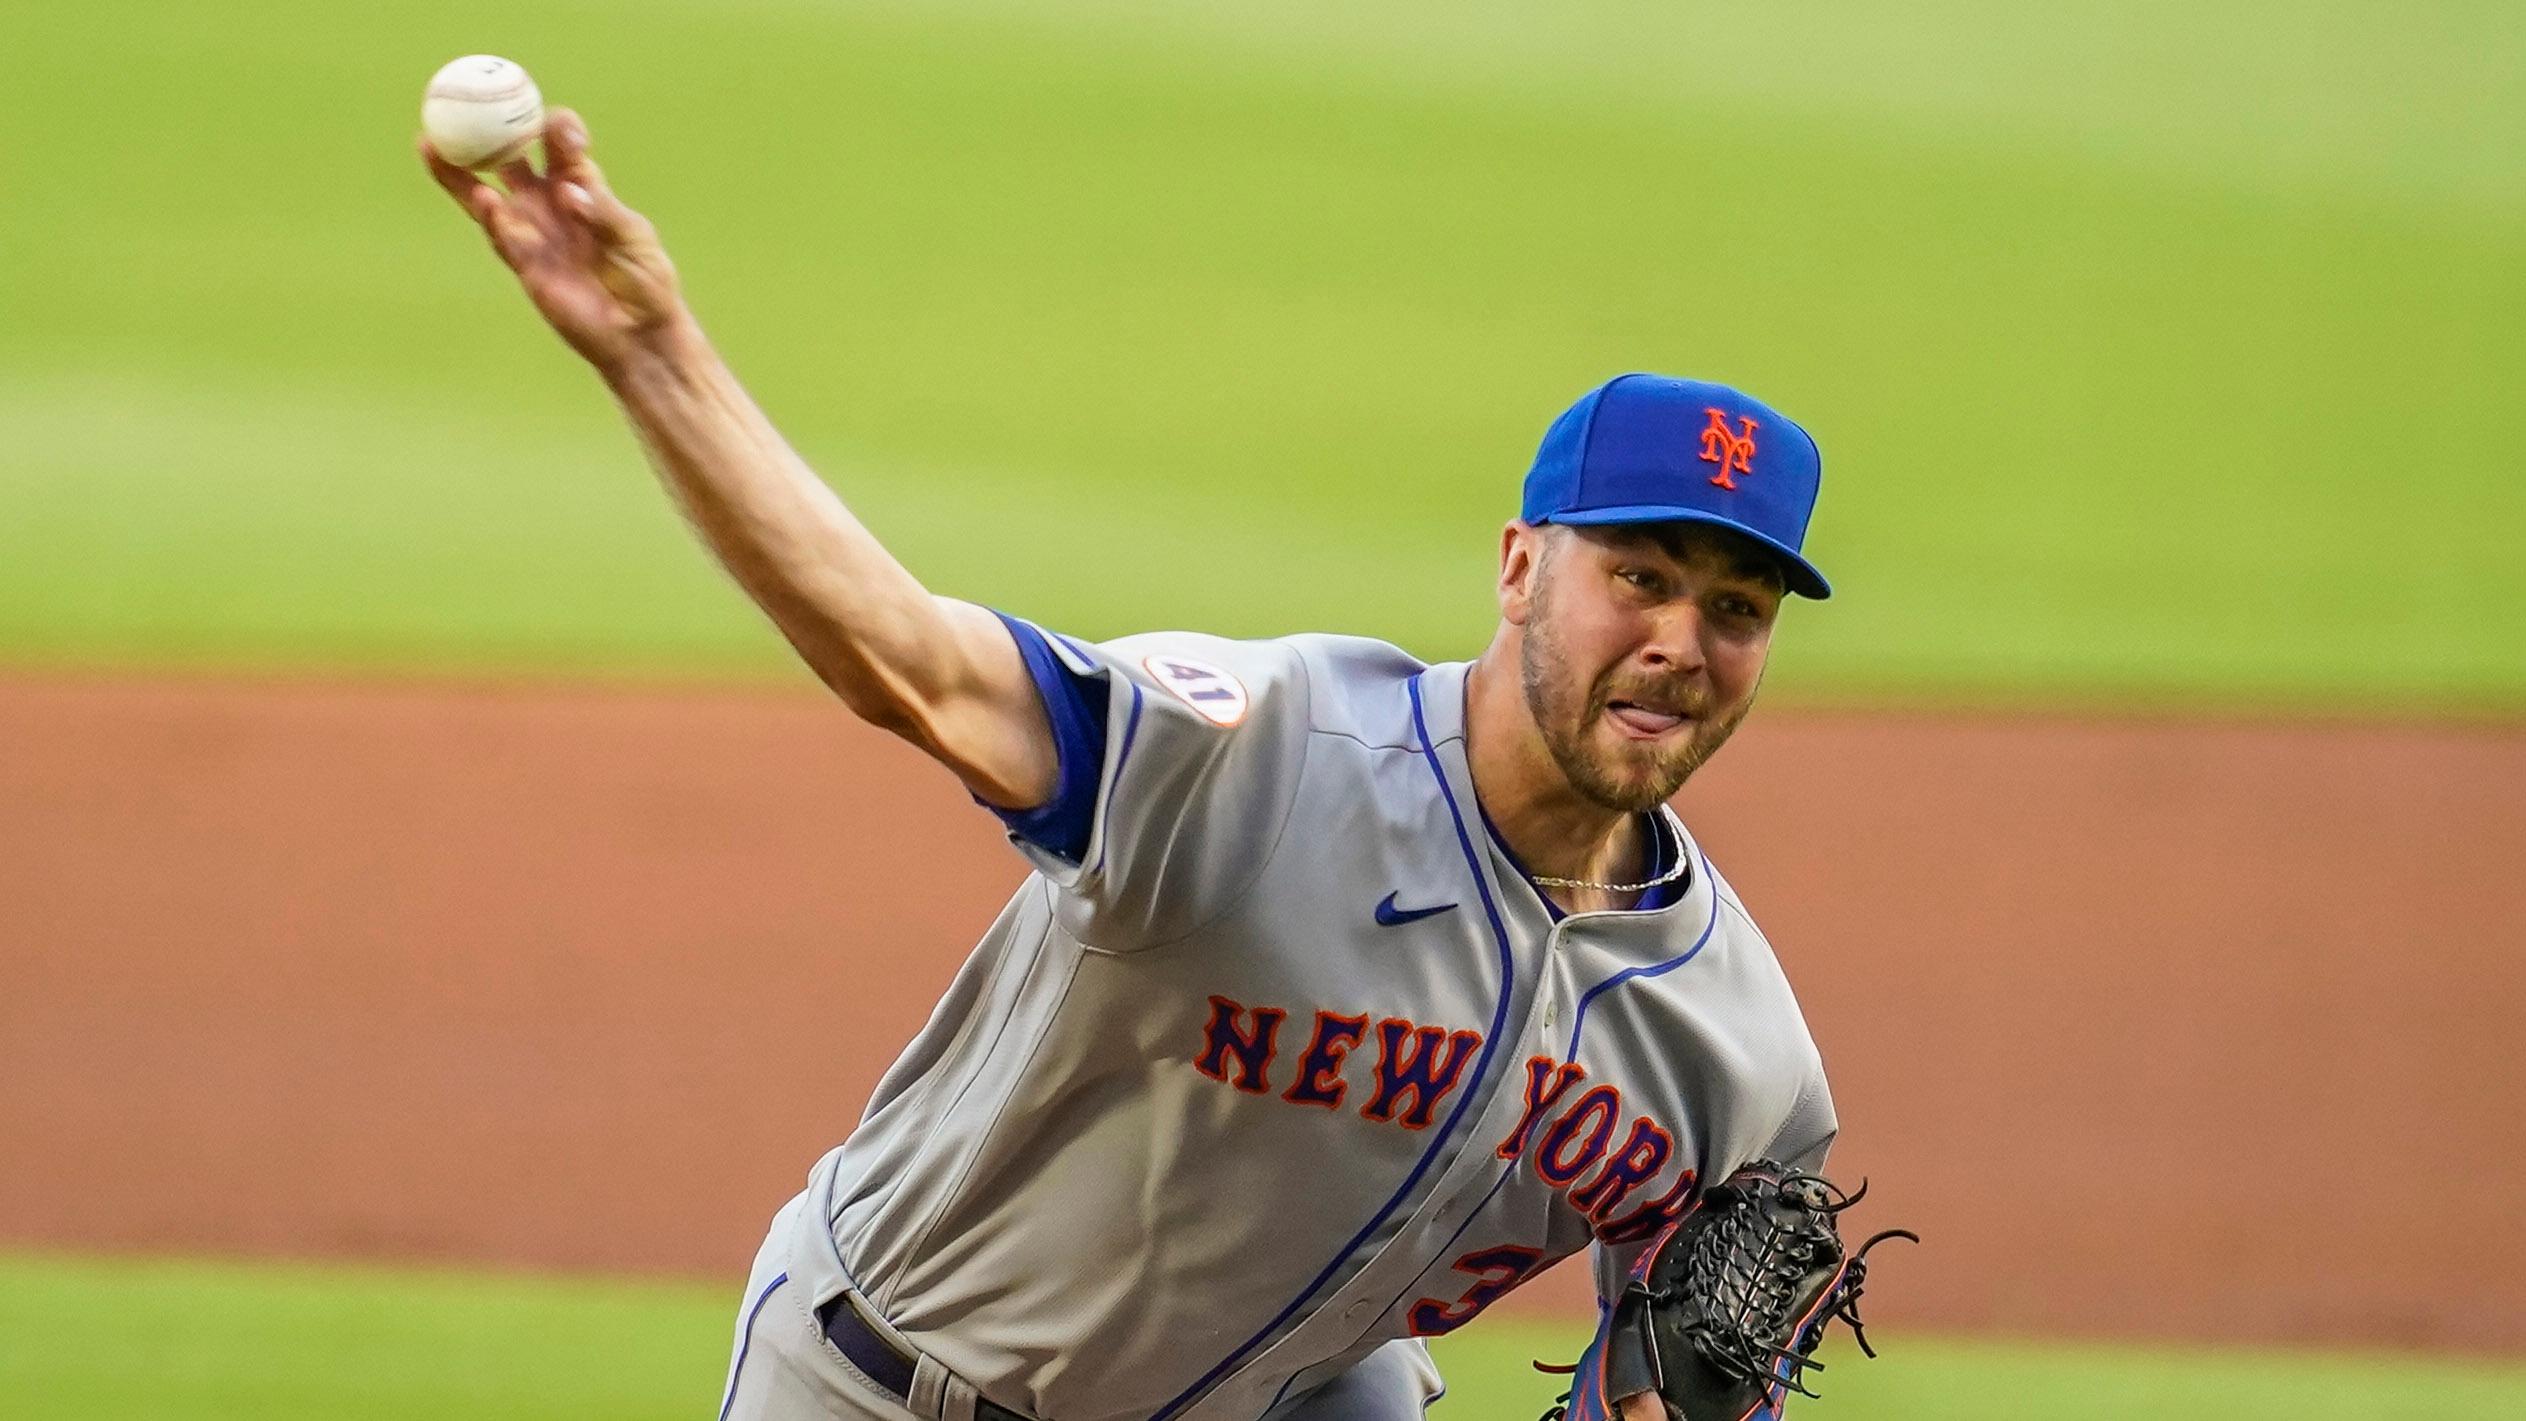 New York Mets relief pitcher Tylor Megill (38) pitches against the Atlanta Braves during the first inning at Truist Park. / Dale Zanine-USA TODAY